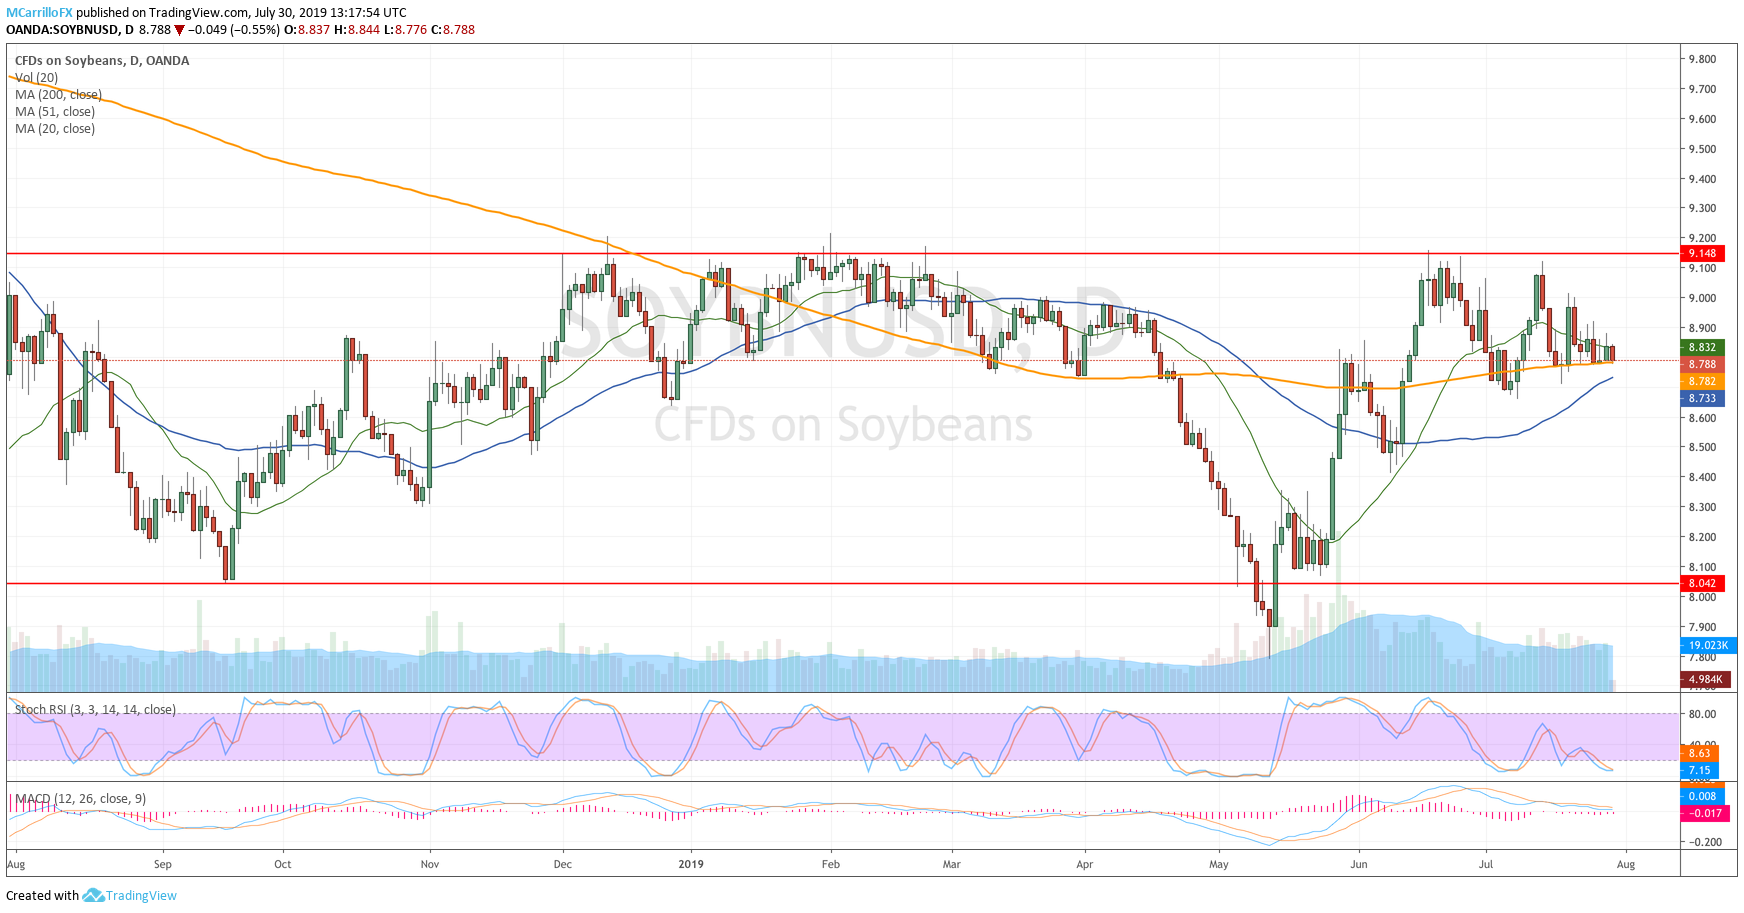 Price of soybean daily chart July 30